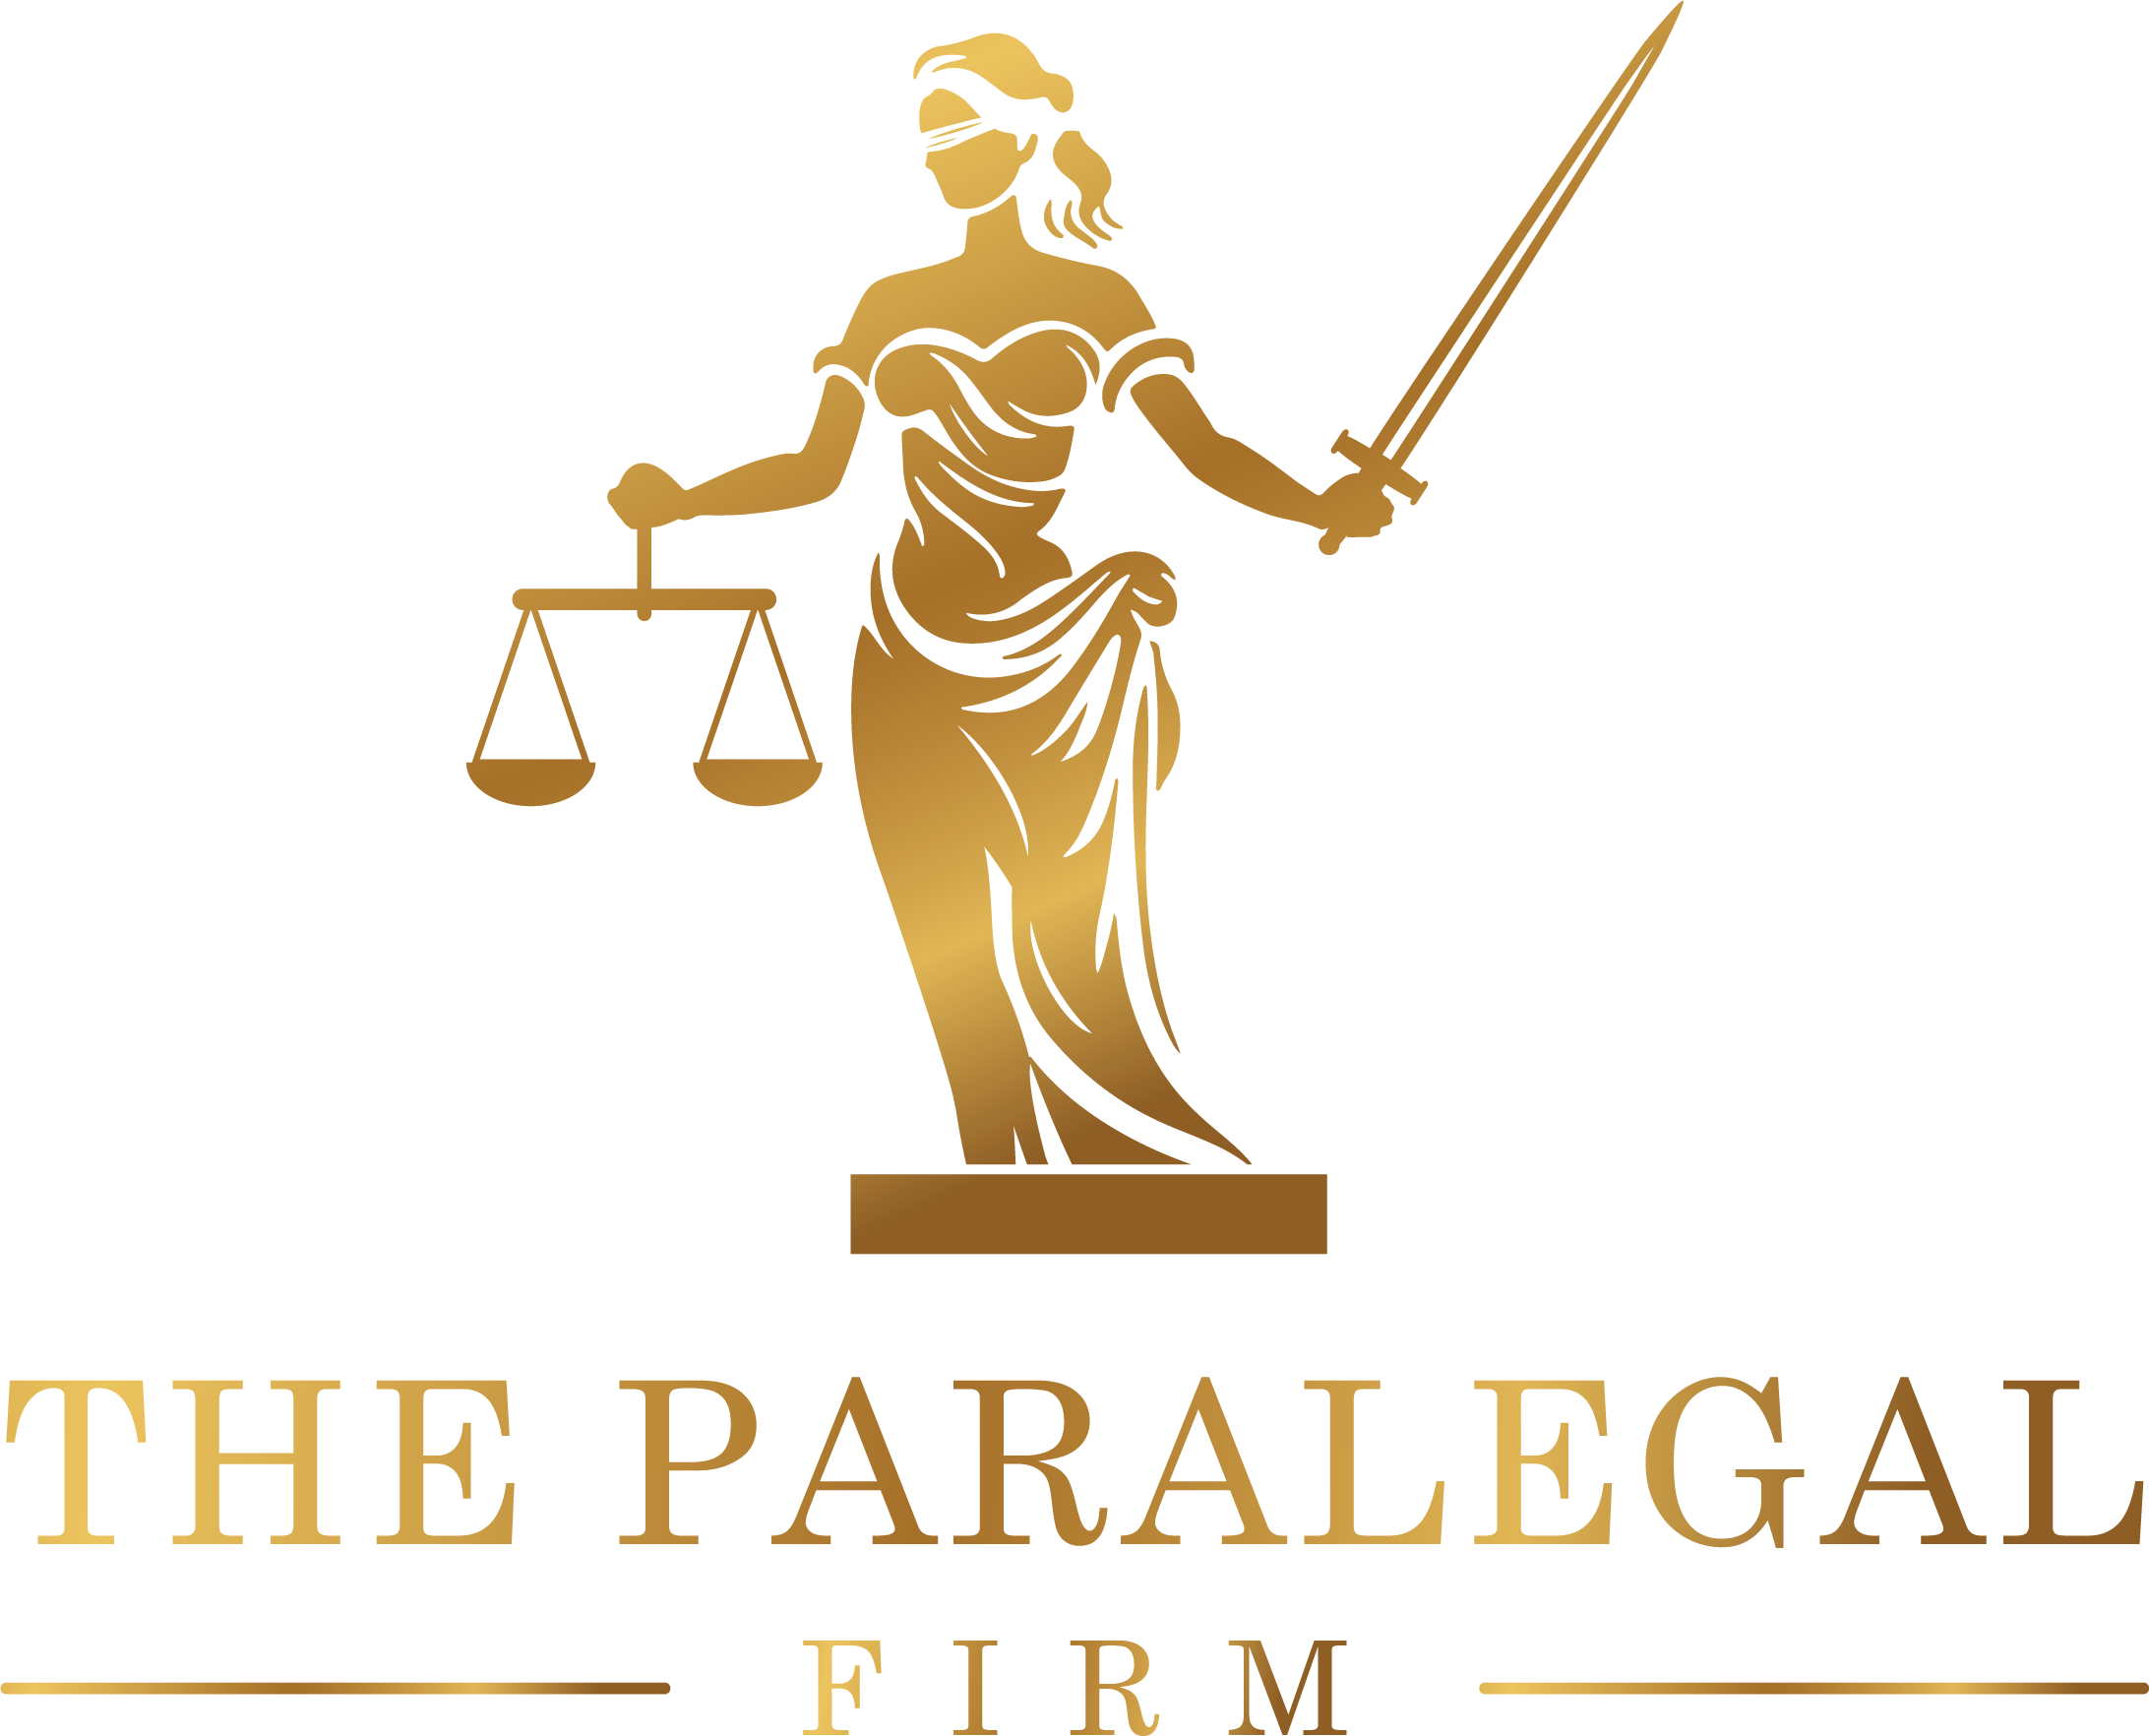 The paralegal firm 